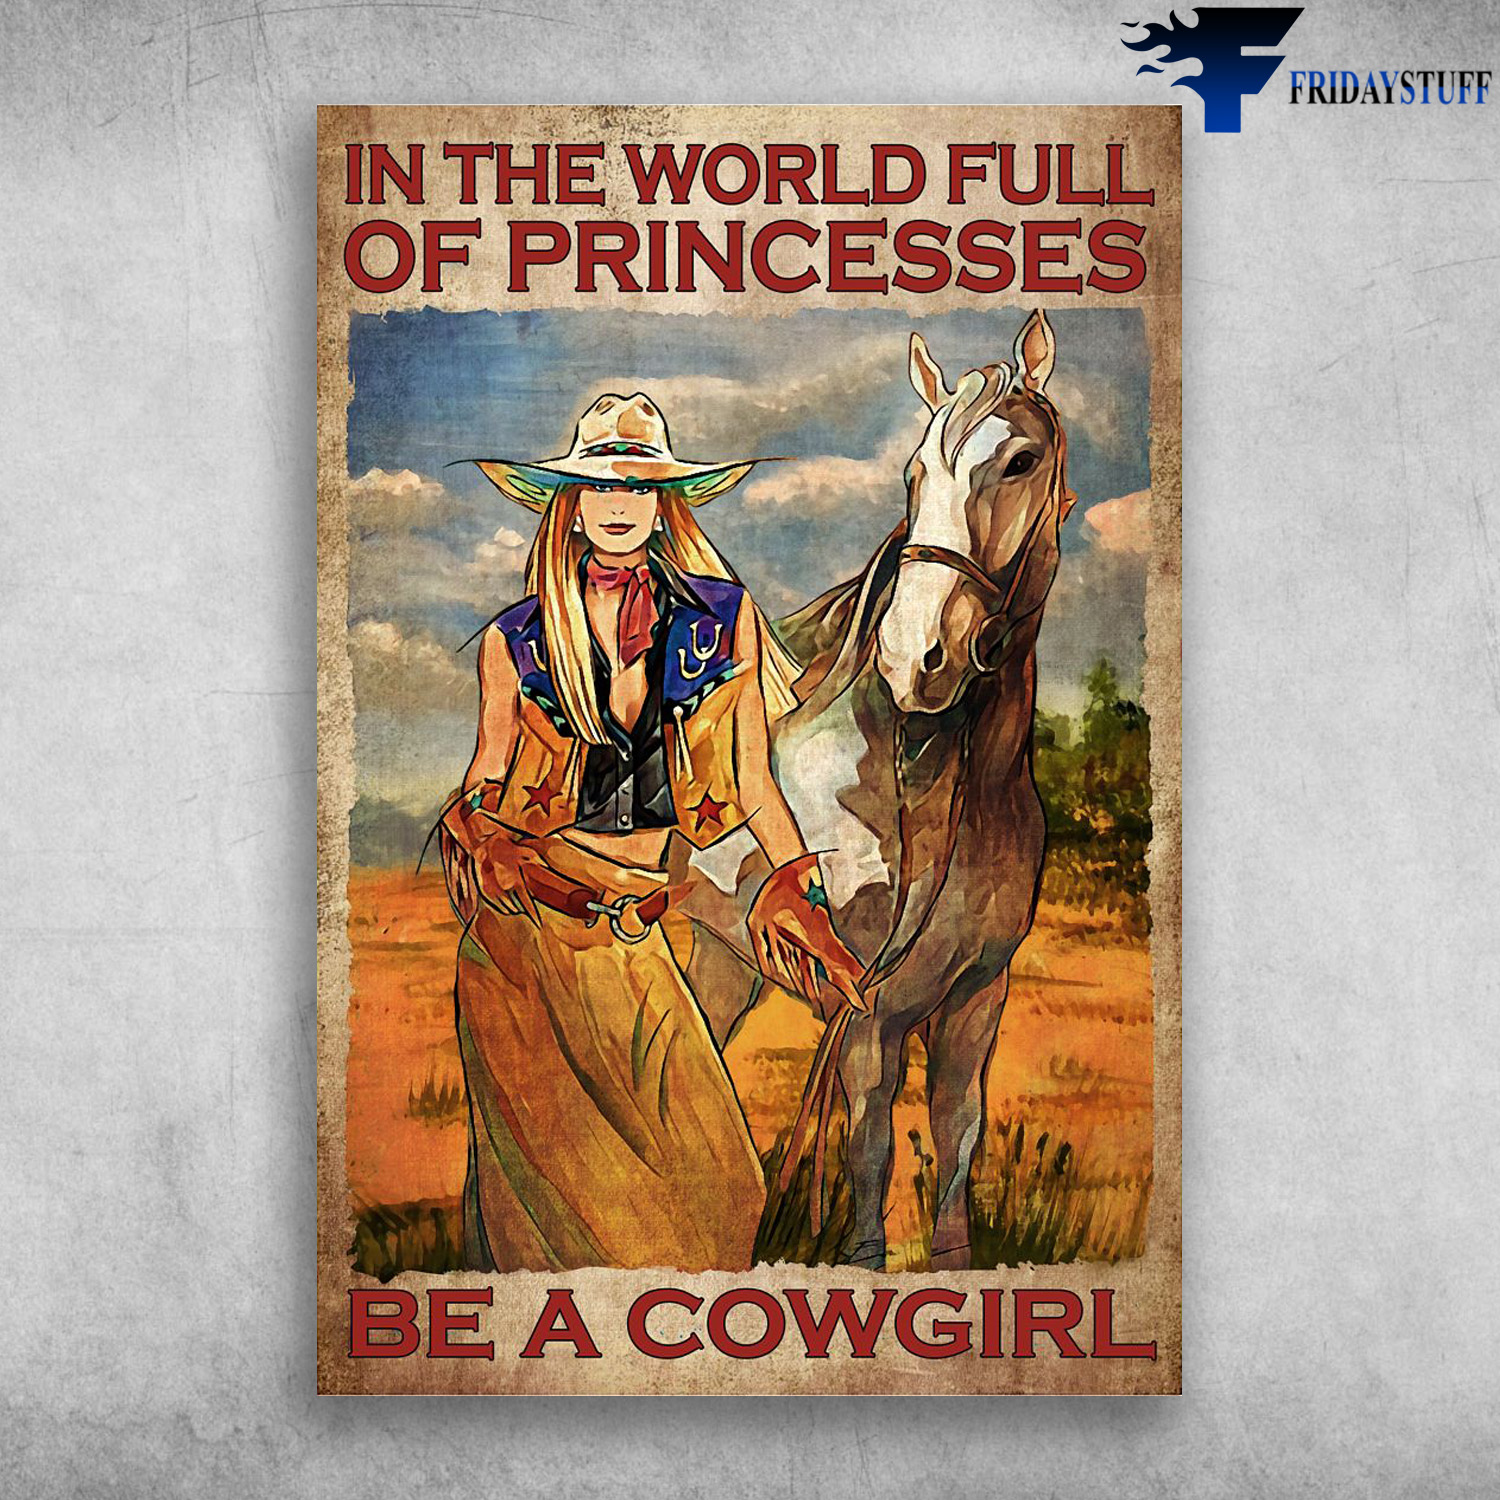 Cowgirl And The Horse - In The World Full Of Princesses, Be A Cowgirl